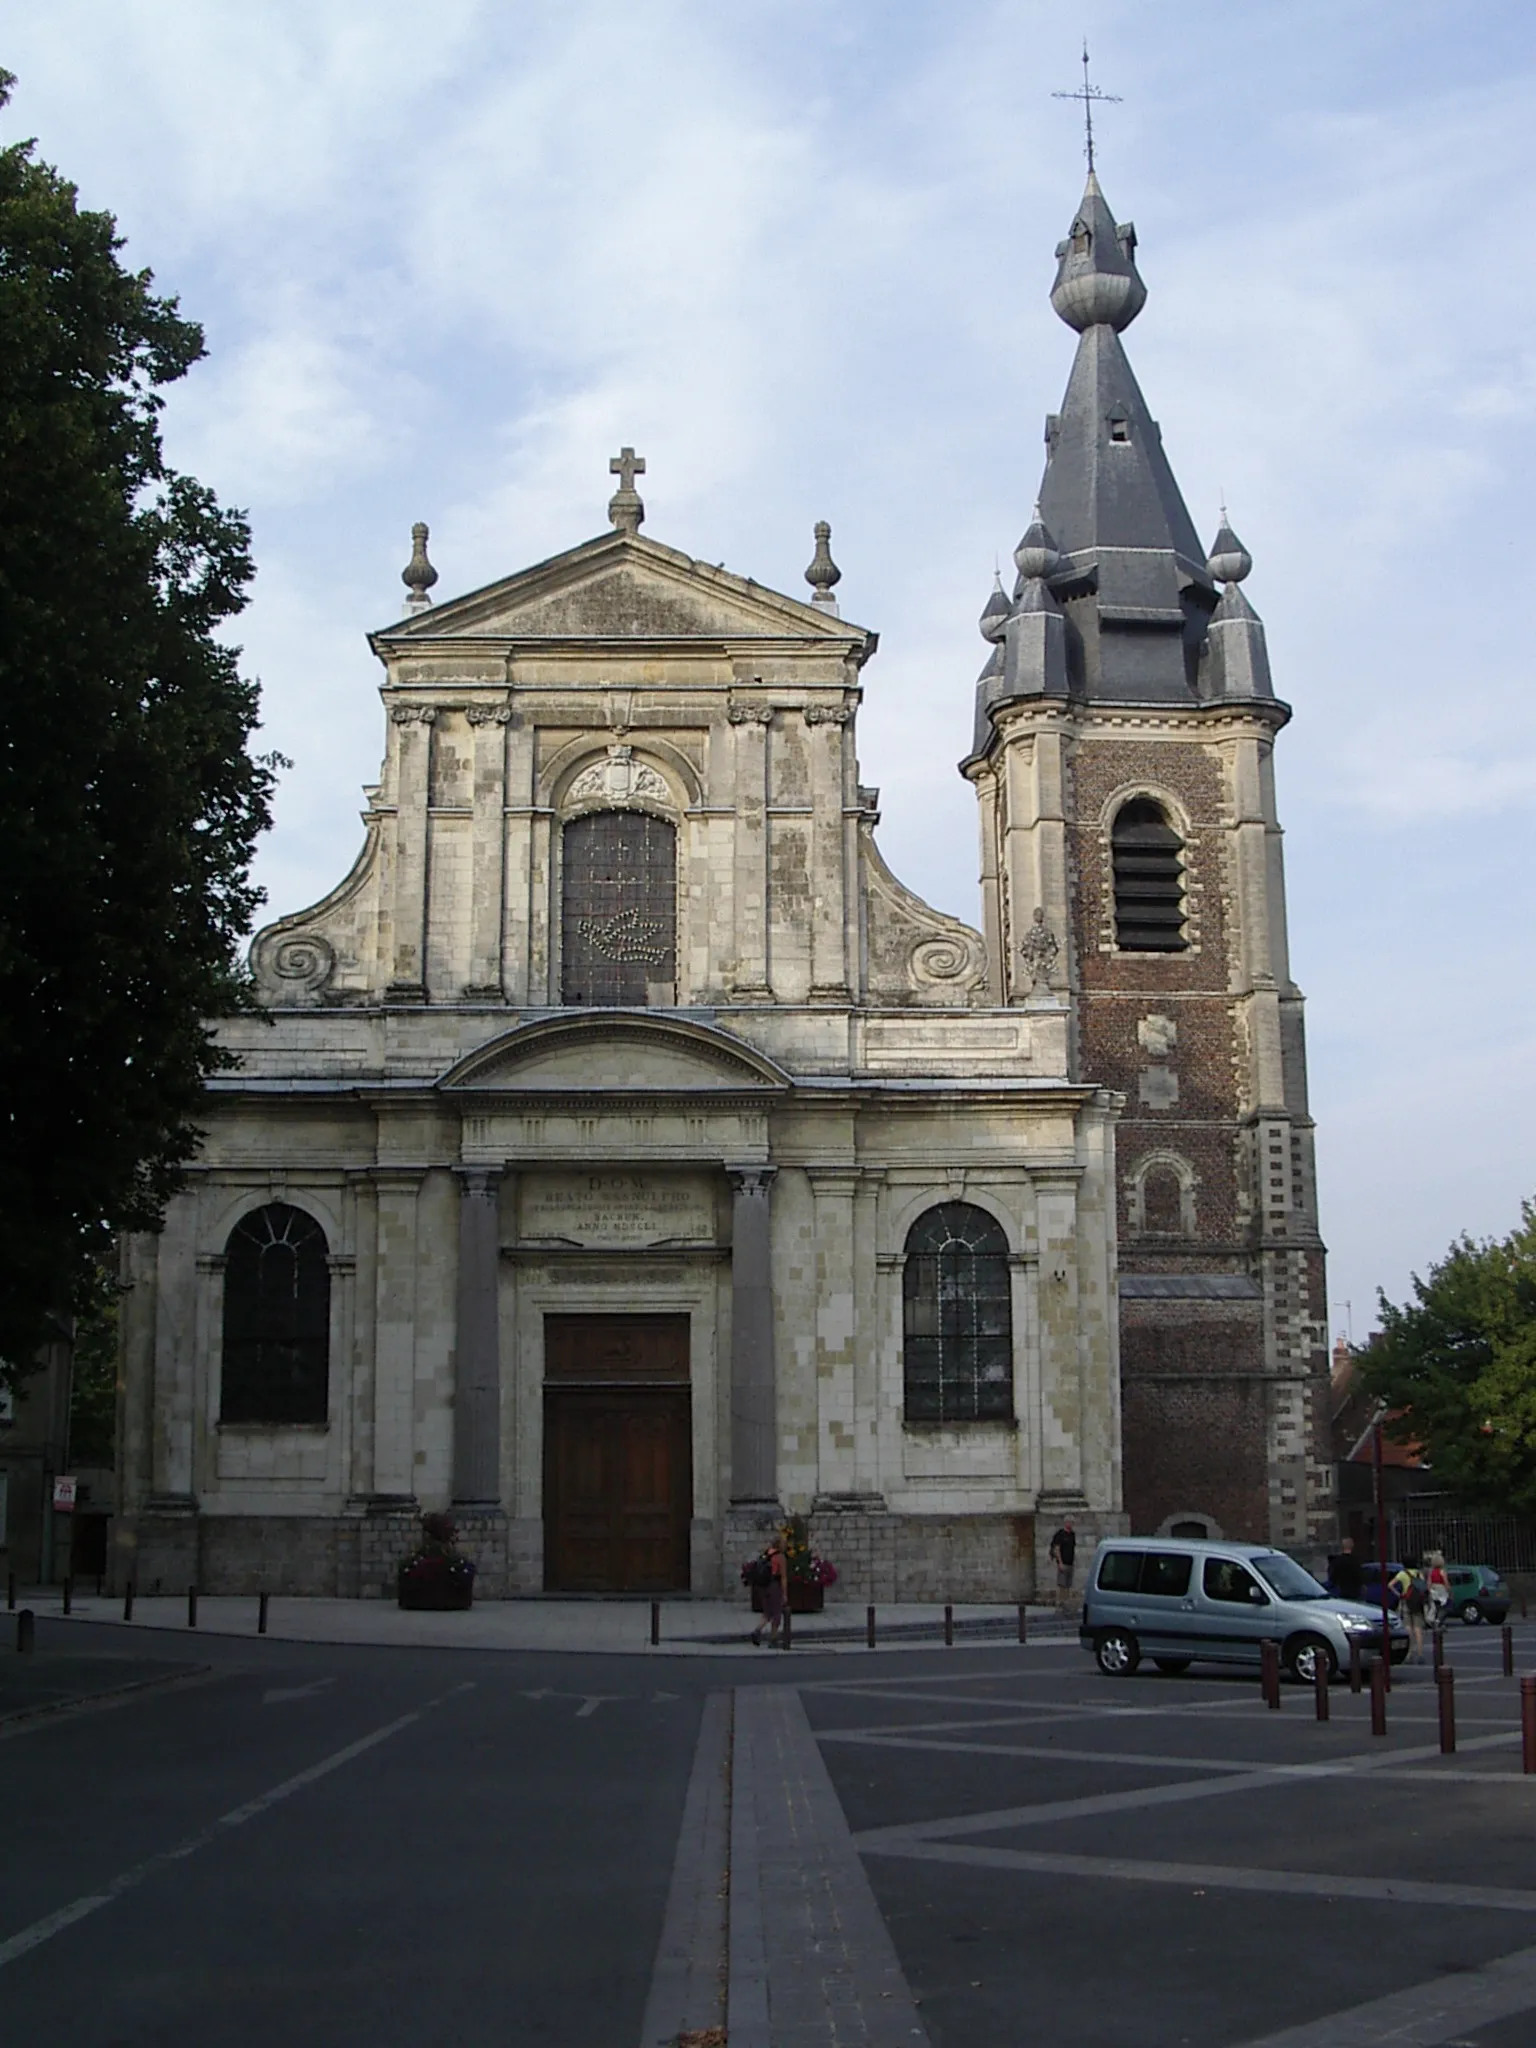 Photo showing: The Saint-Wasnon Parish Church, built in 1751 to the designs of Pierre Contant d'Ivry, with the bell tower dating from 1607